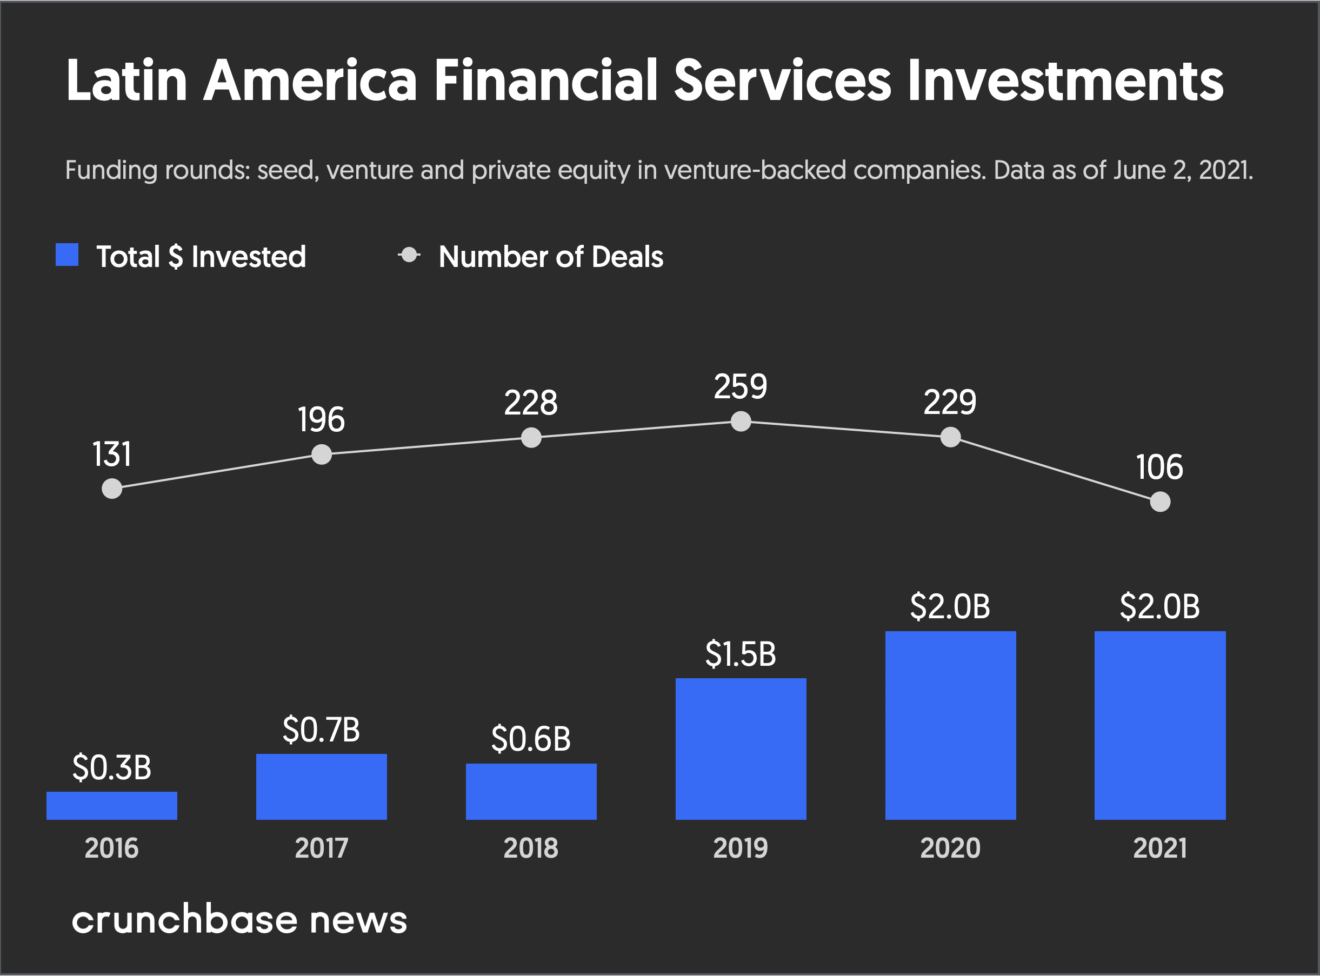 Latin America financial services investments, Crunchbase News, June 2021